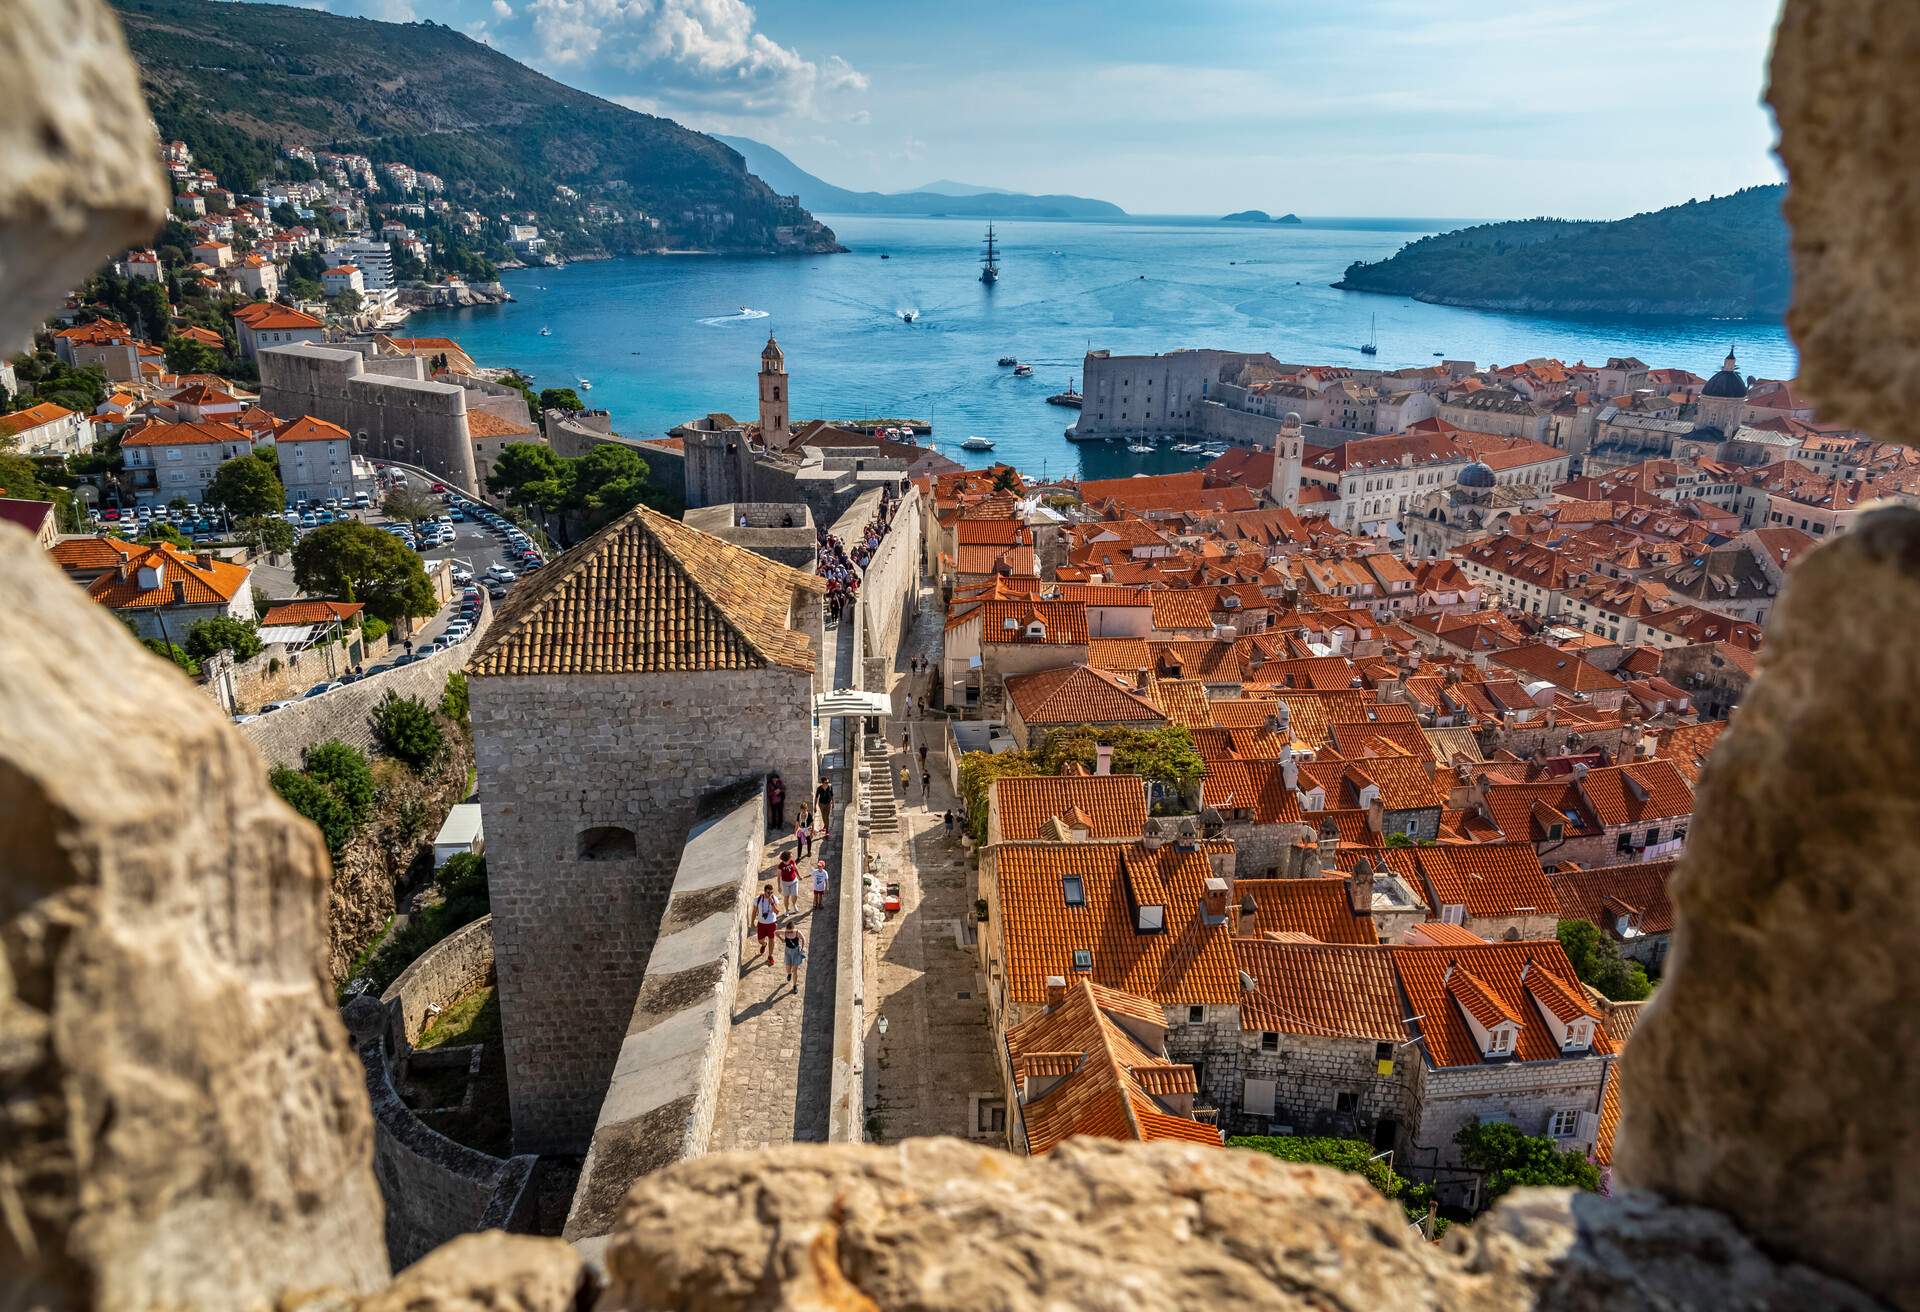 The Old City of Dubrovnik situated on the Dalmatian coast, became an important Mediterranean sea power from the 13th century onwards.